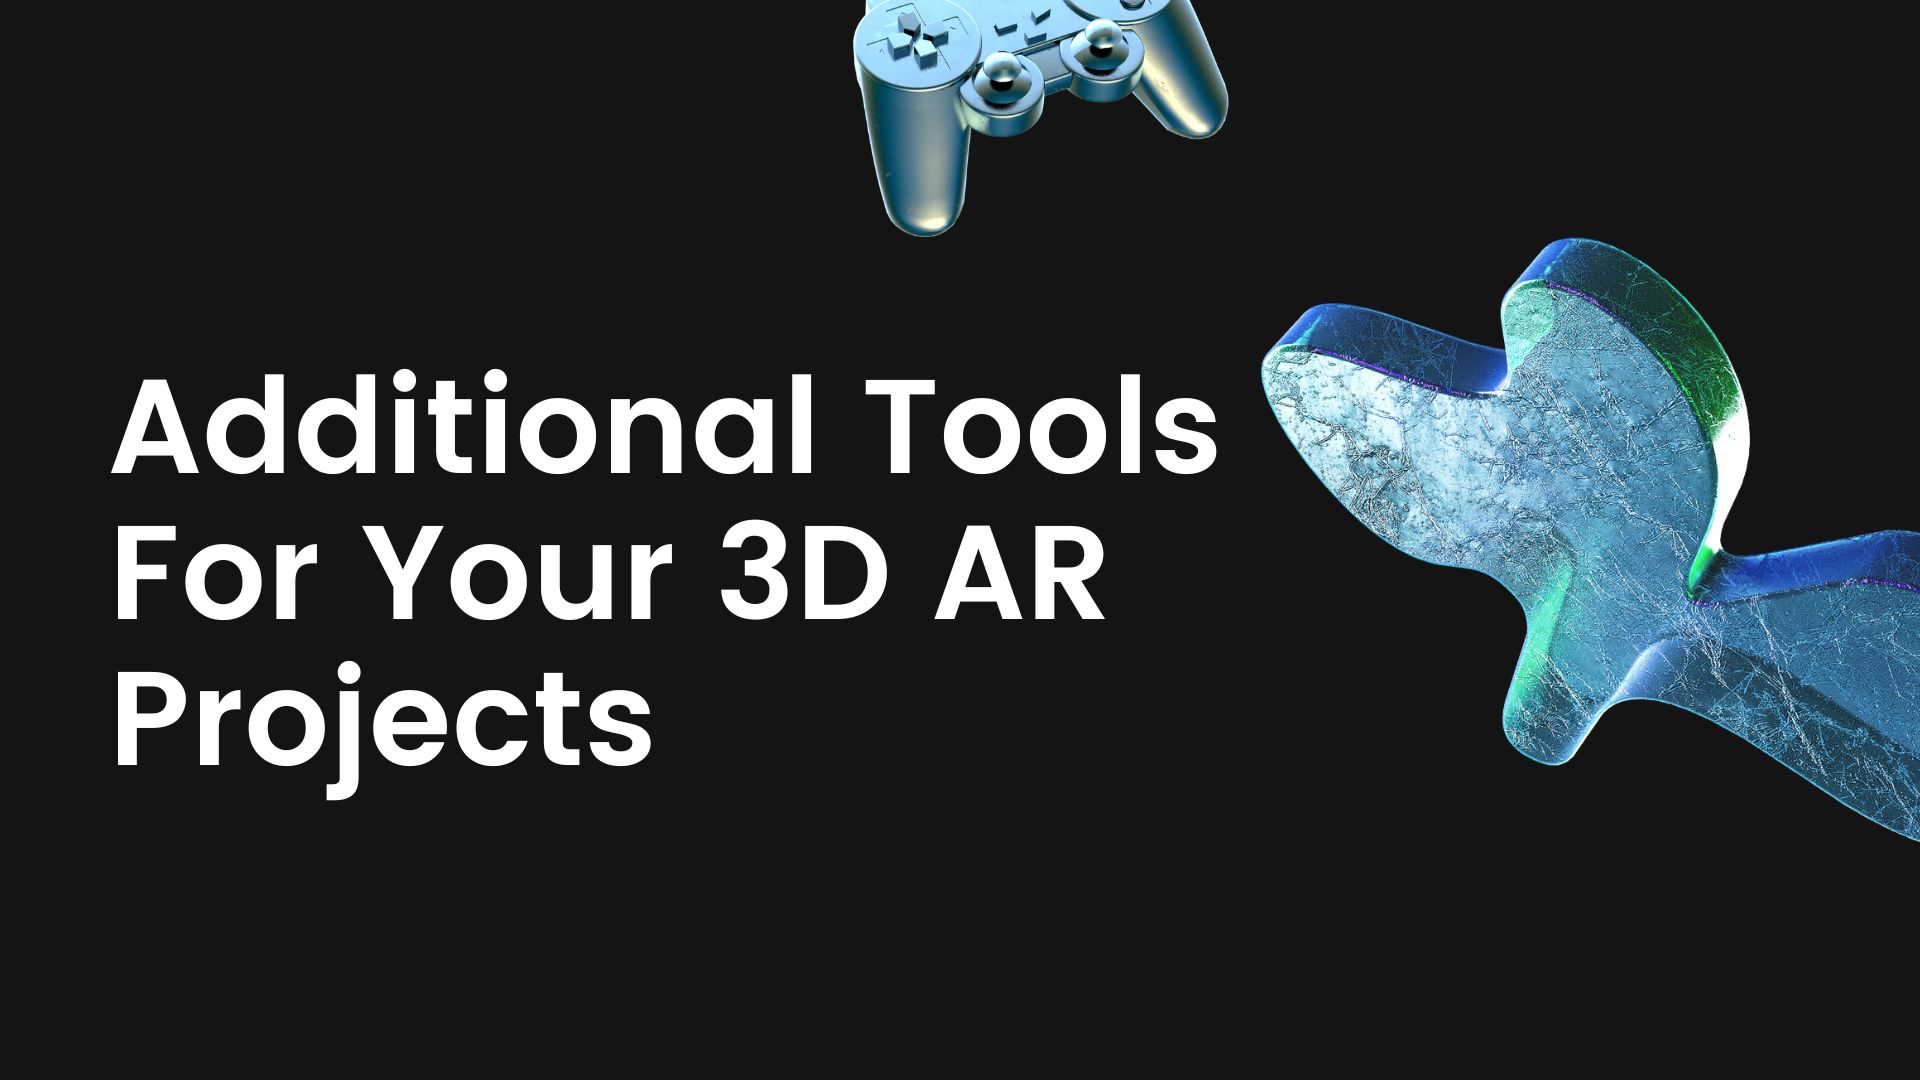 Additional tools for your 3D Augmented Reality projects